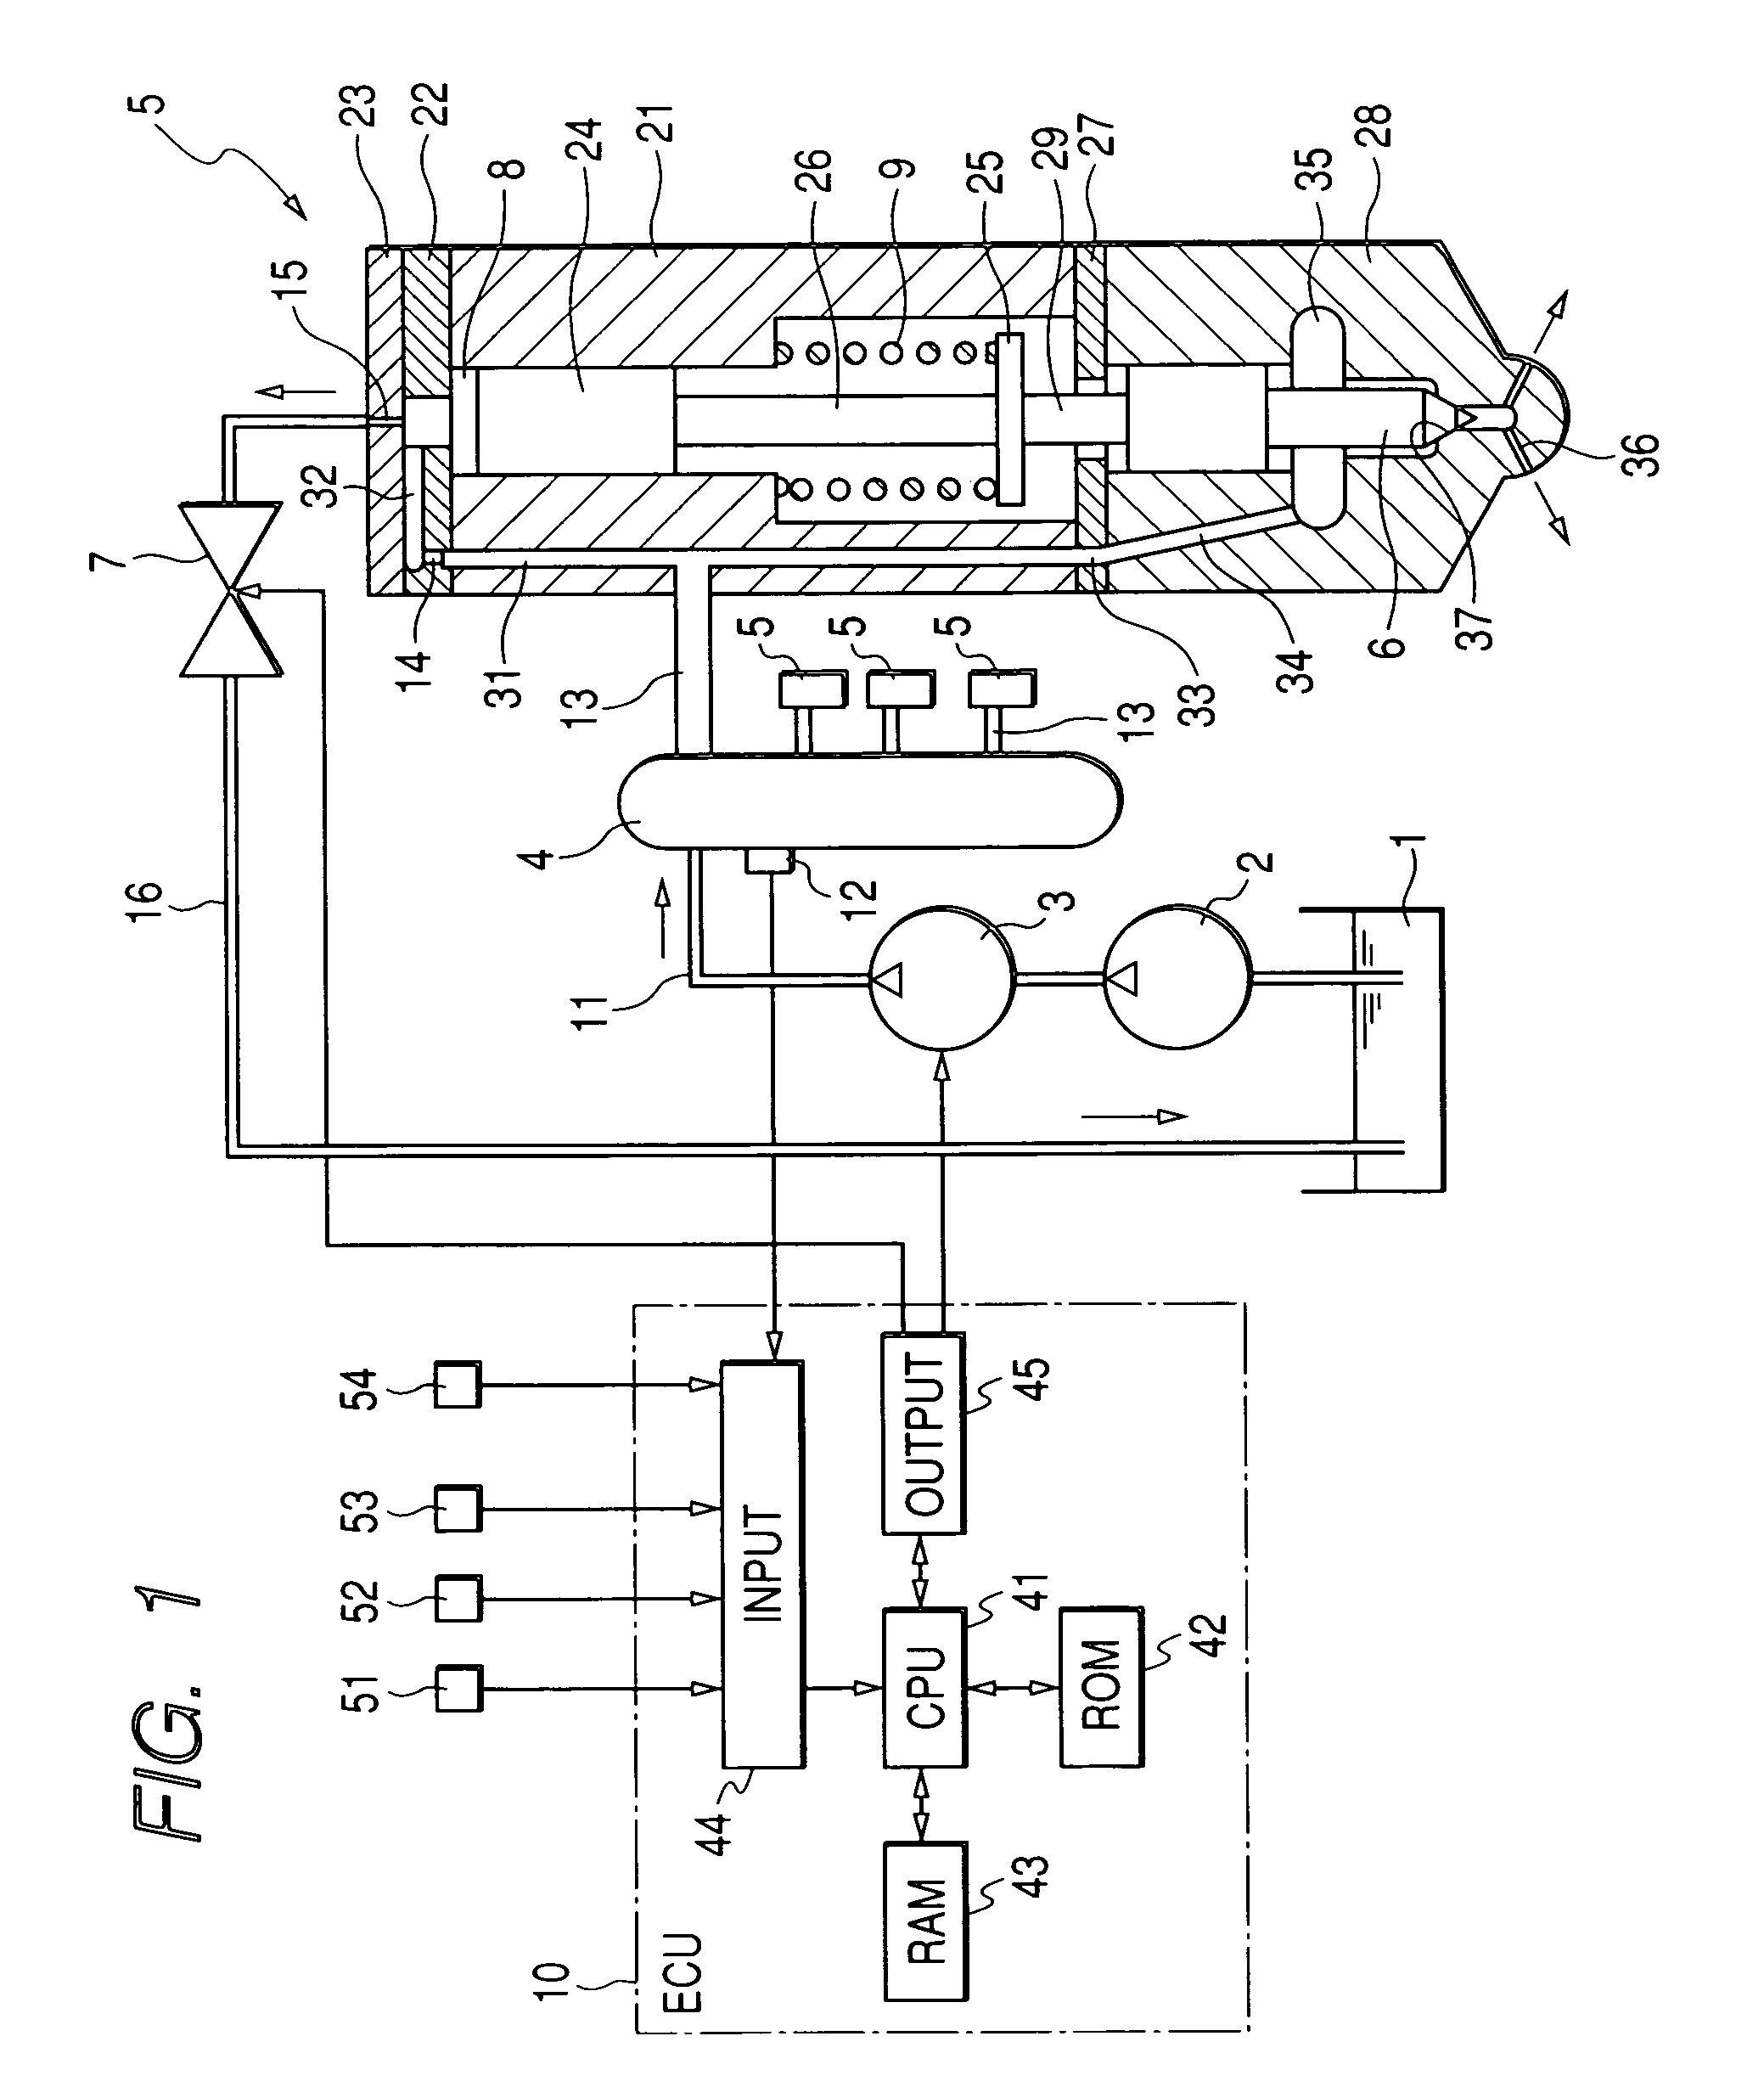 Accumulator fuel injection apparatus compensating for injector individual variability